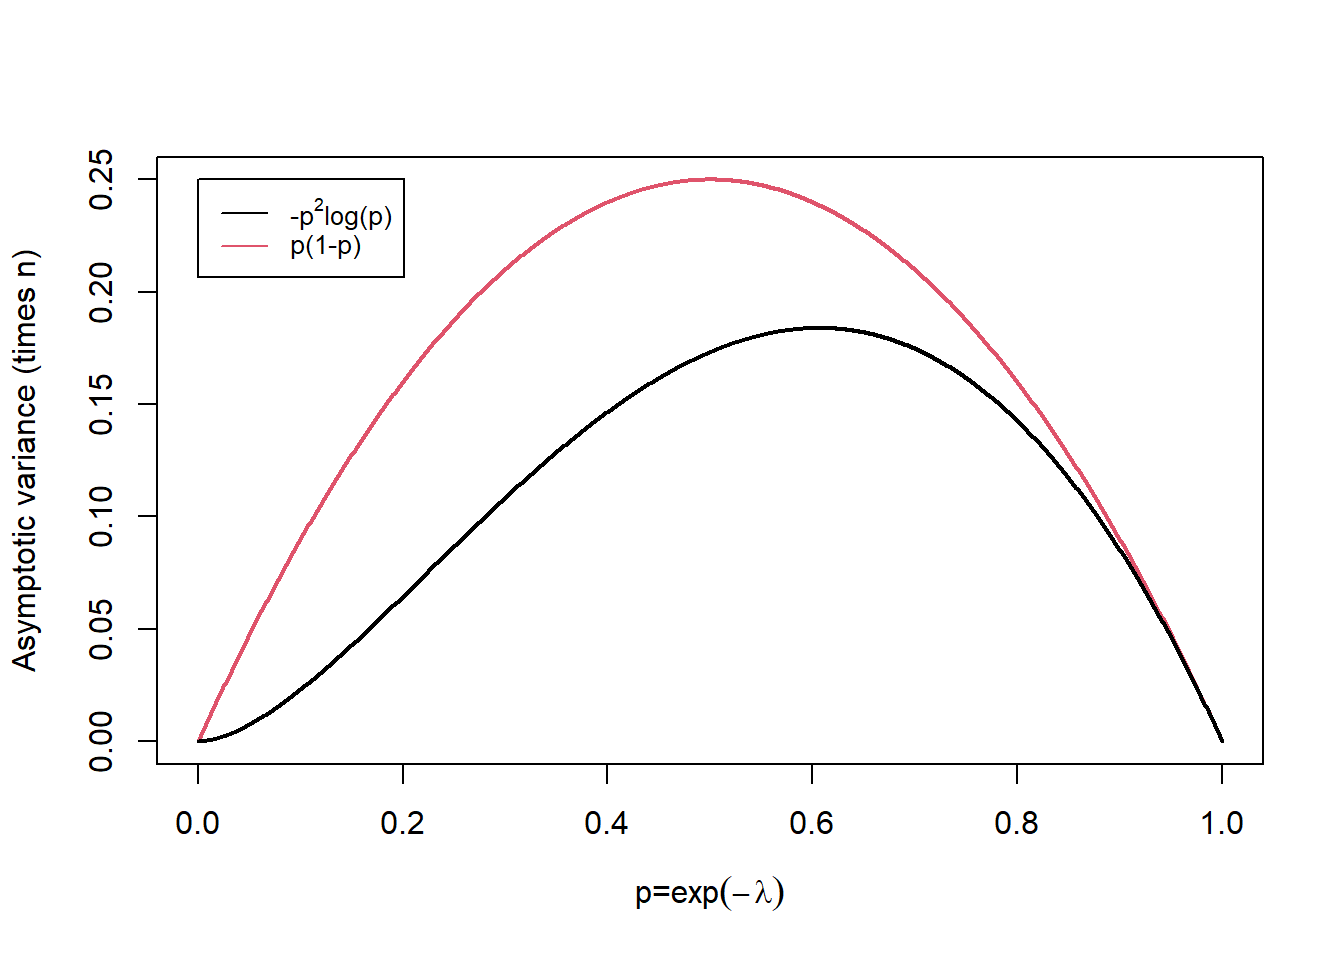 Asymptotic variance times sample size, n, for varying p.